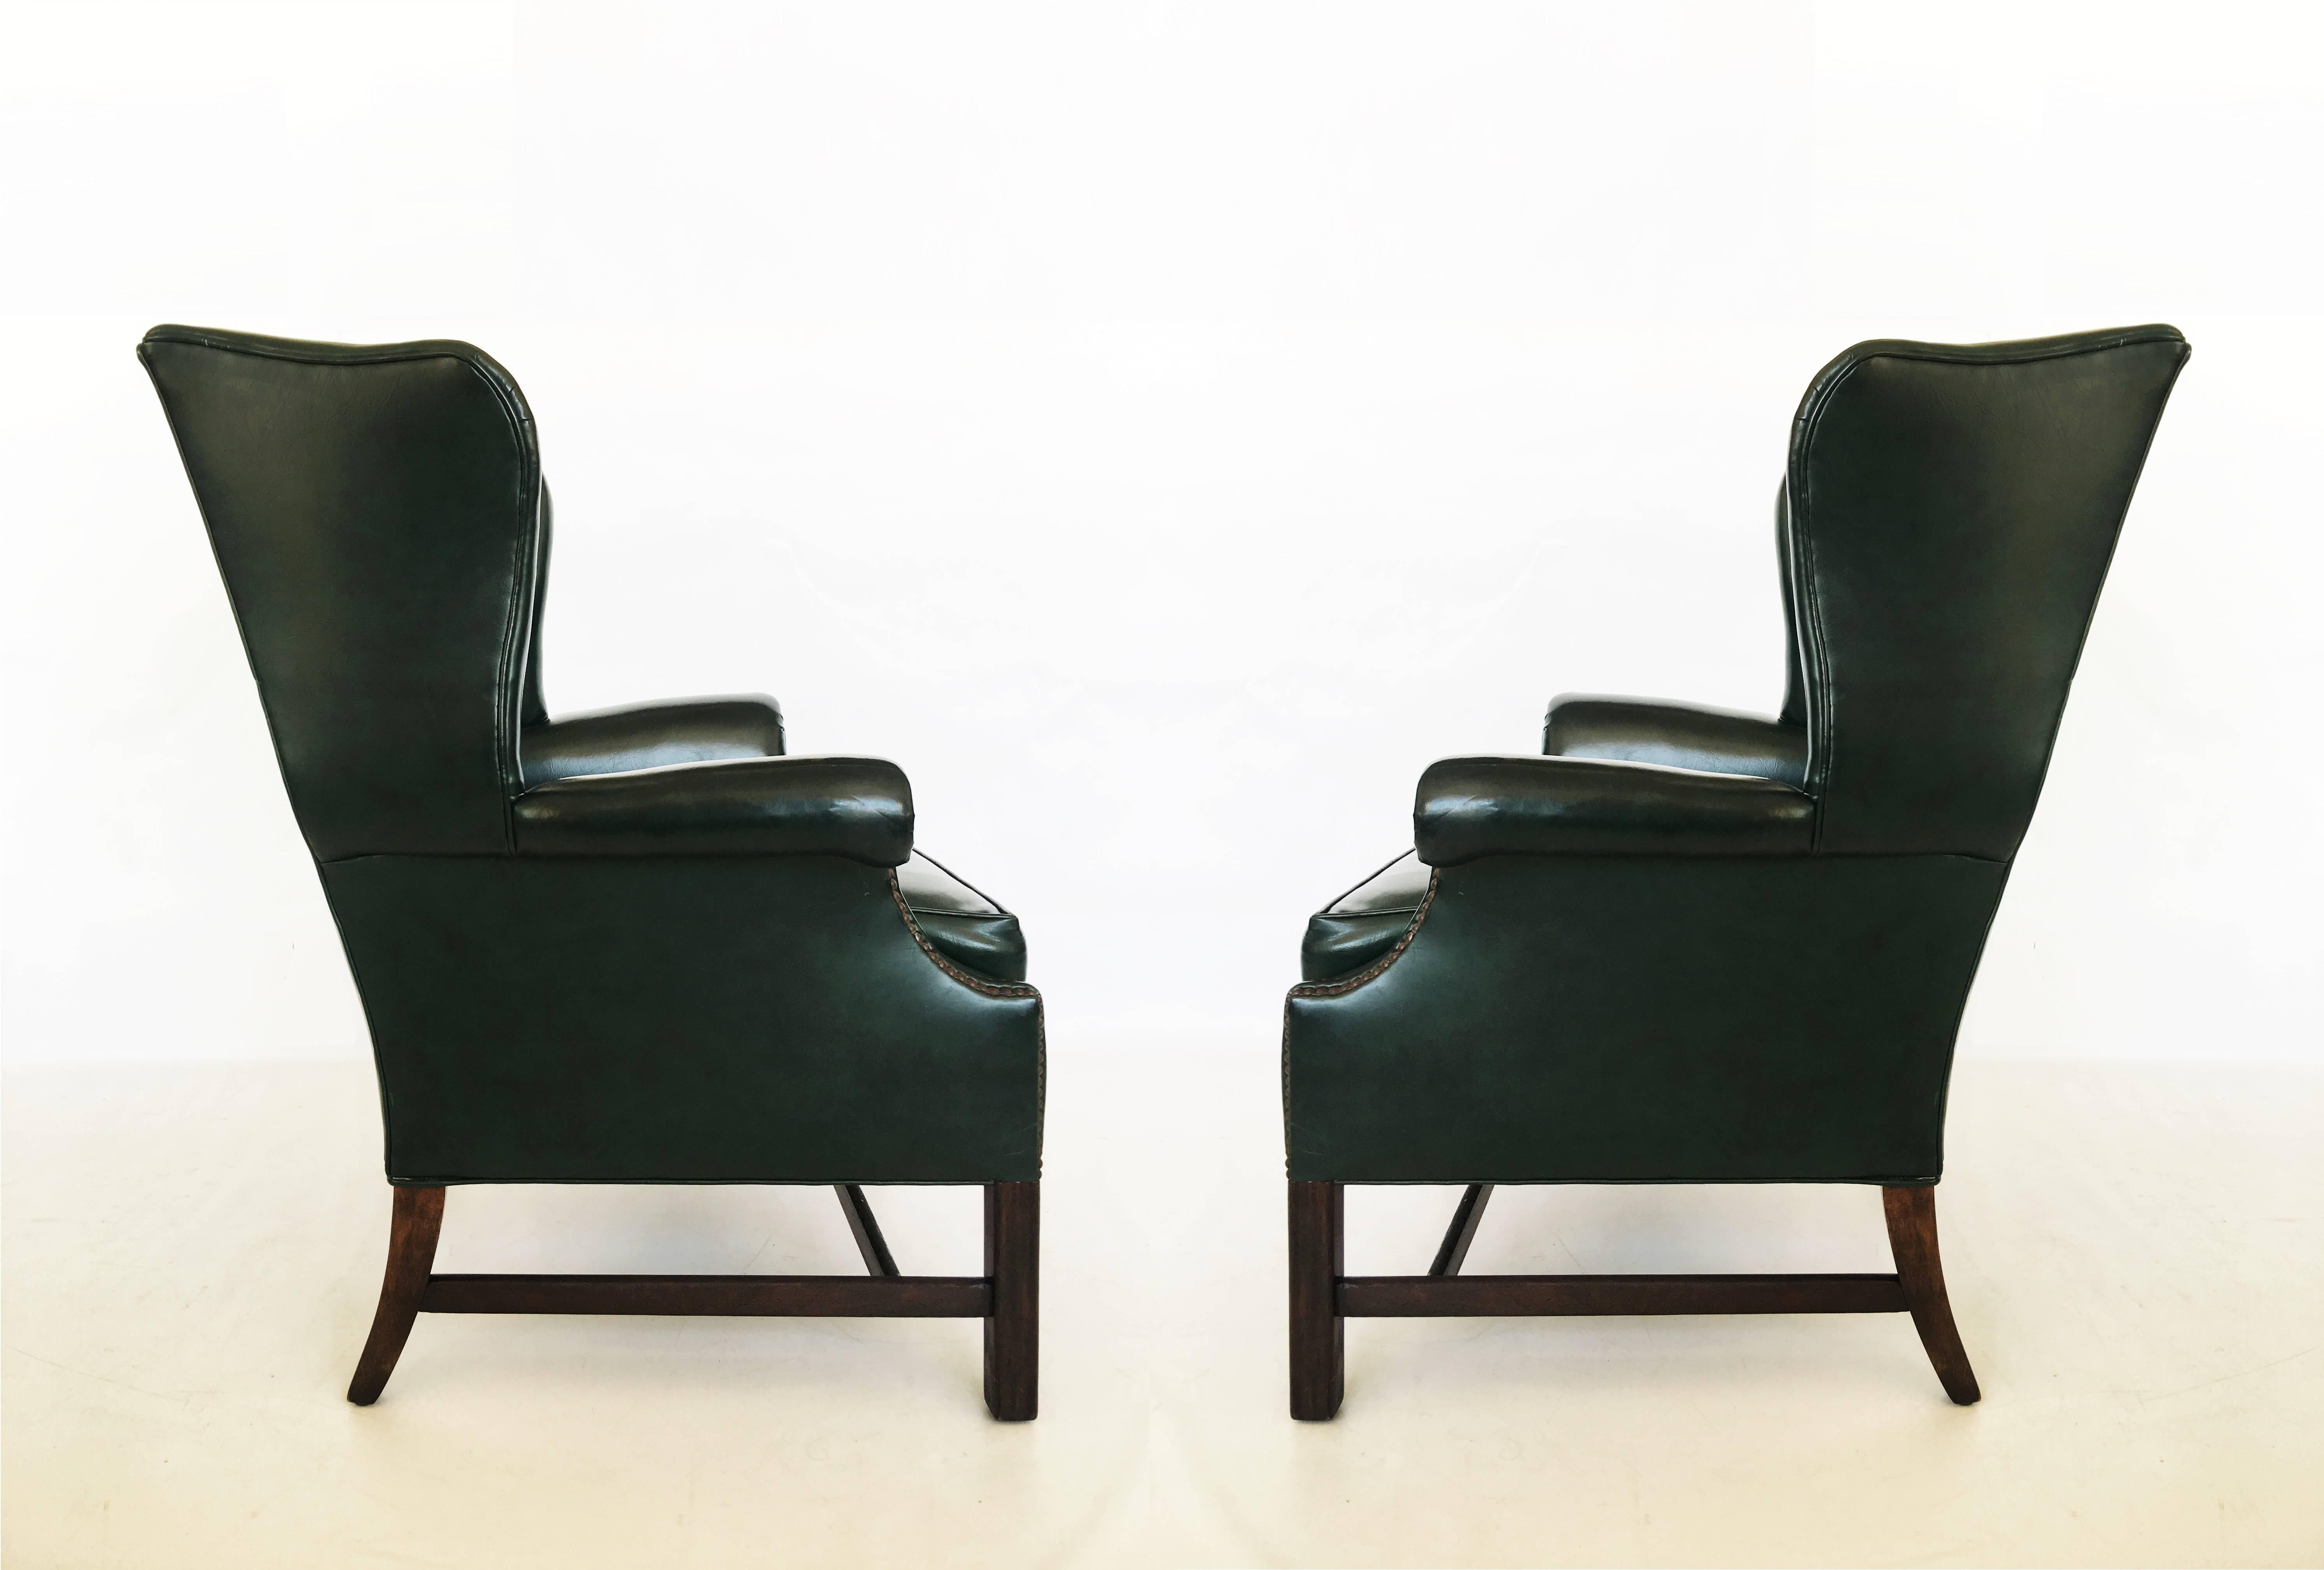 Luxurious pair of dark green deep tufted leather English Chesterfield chairs. With Classic high upholstered wingback frames. Featuring domed crest, shaped wings, a loose cushioned seat and out scrolled arms flanking button back on bead-and-channel